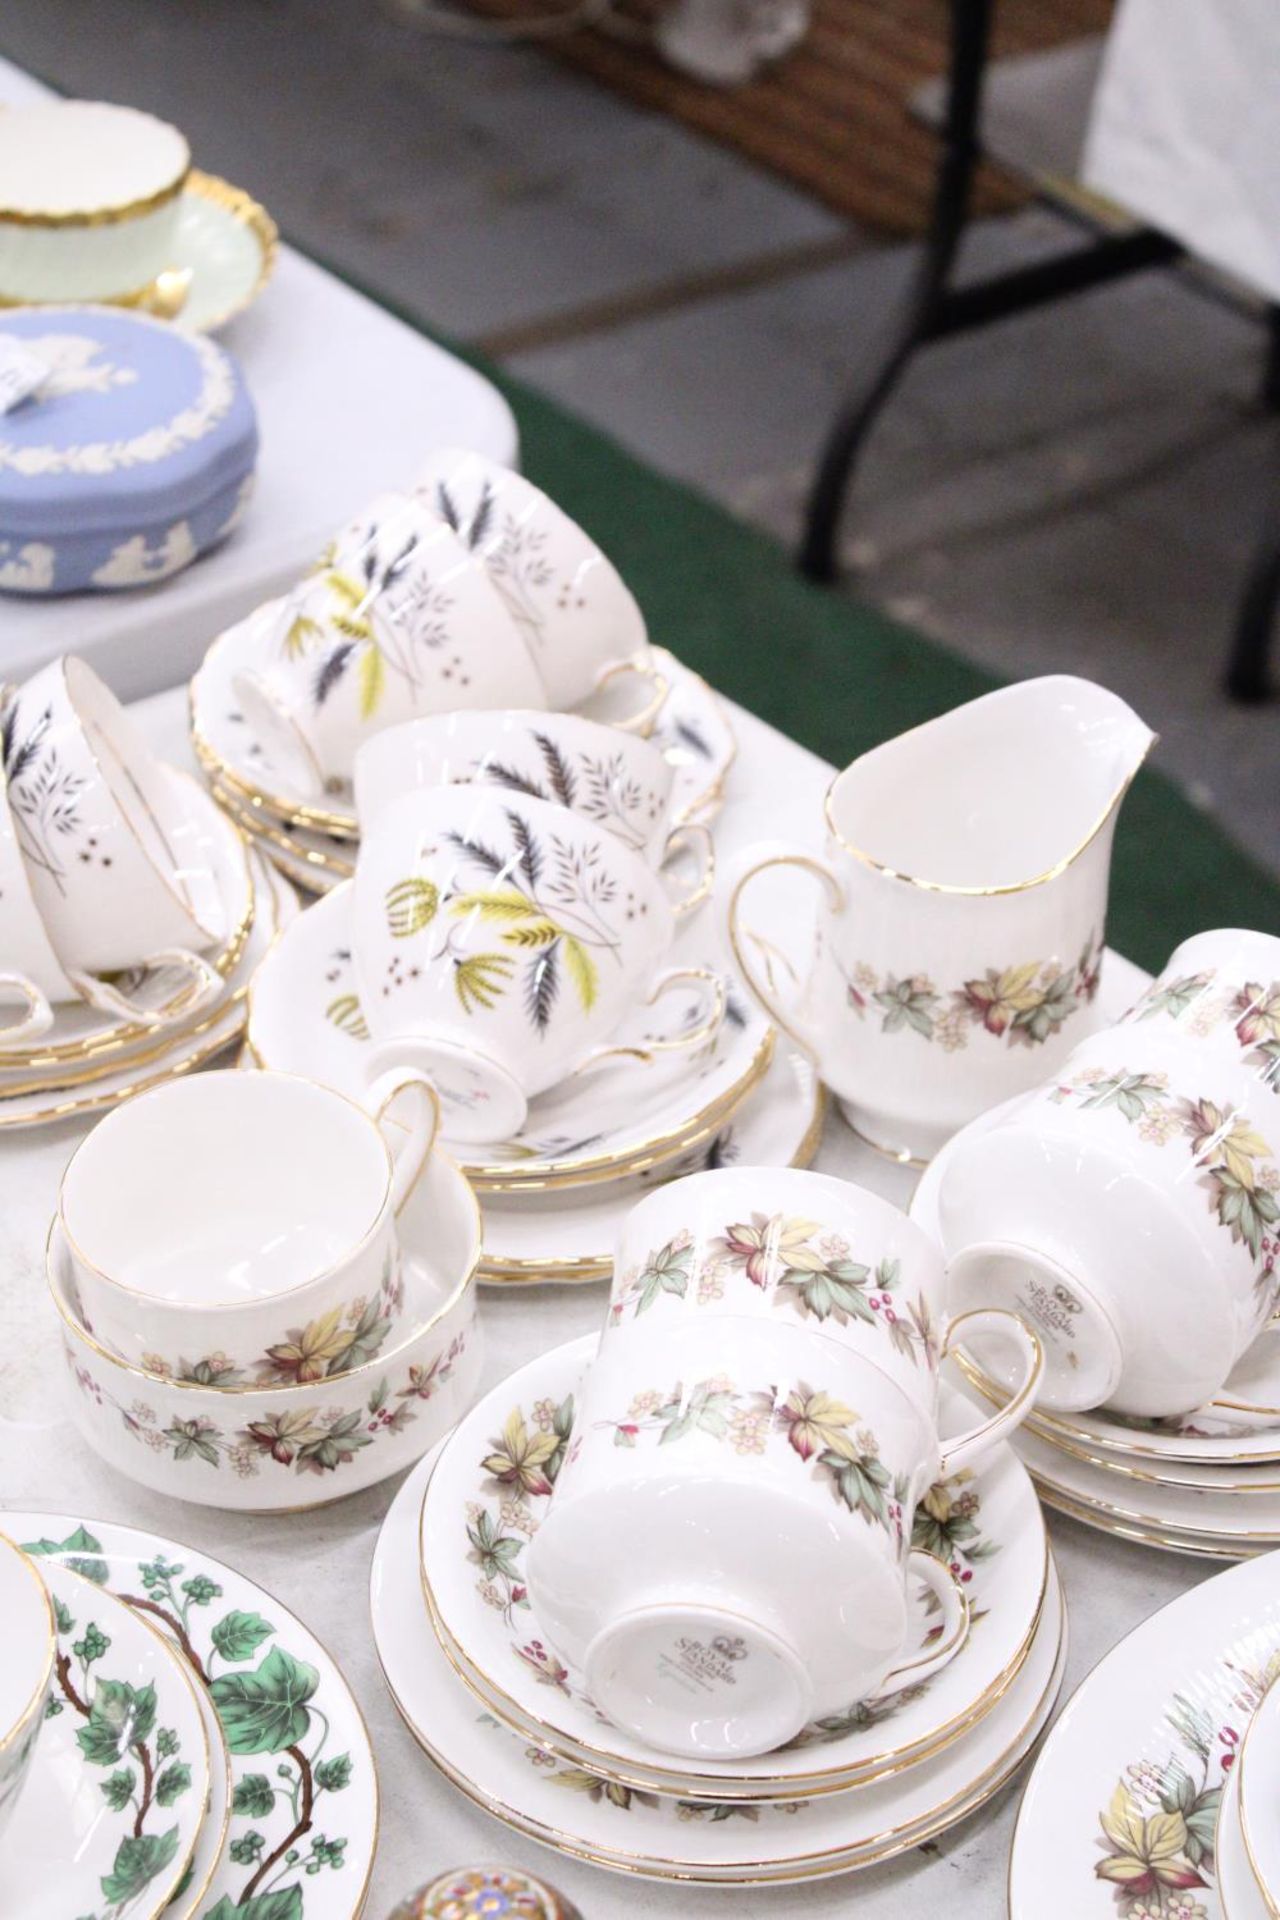 A QUANTITY OF CHINA TEAWARE TO INCLUDE ROYAL STANDARD AND COLCLOUGH - CUPS, SAUCERS, SIDE PLATES, - Bild 5 aus 5